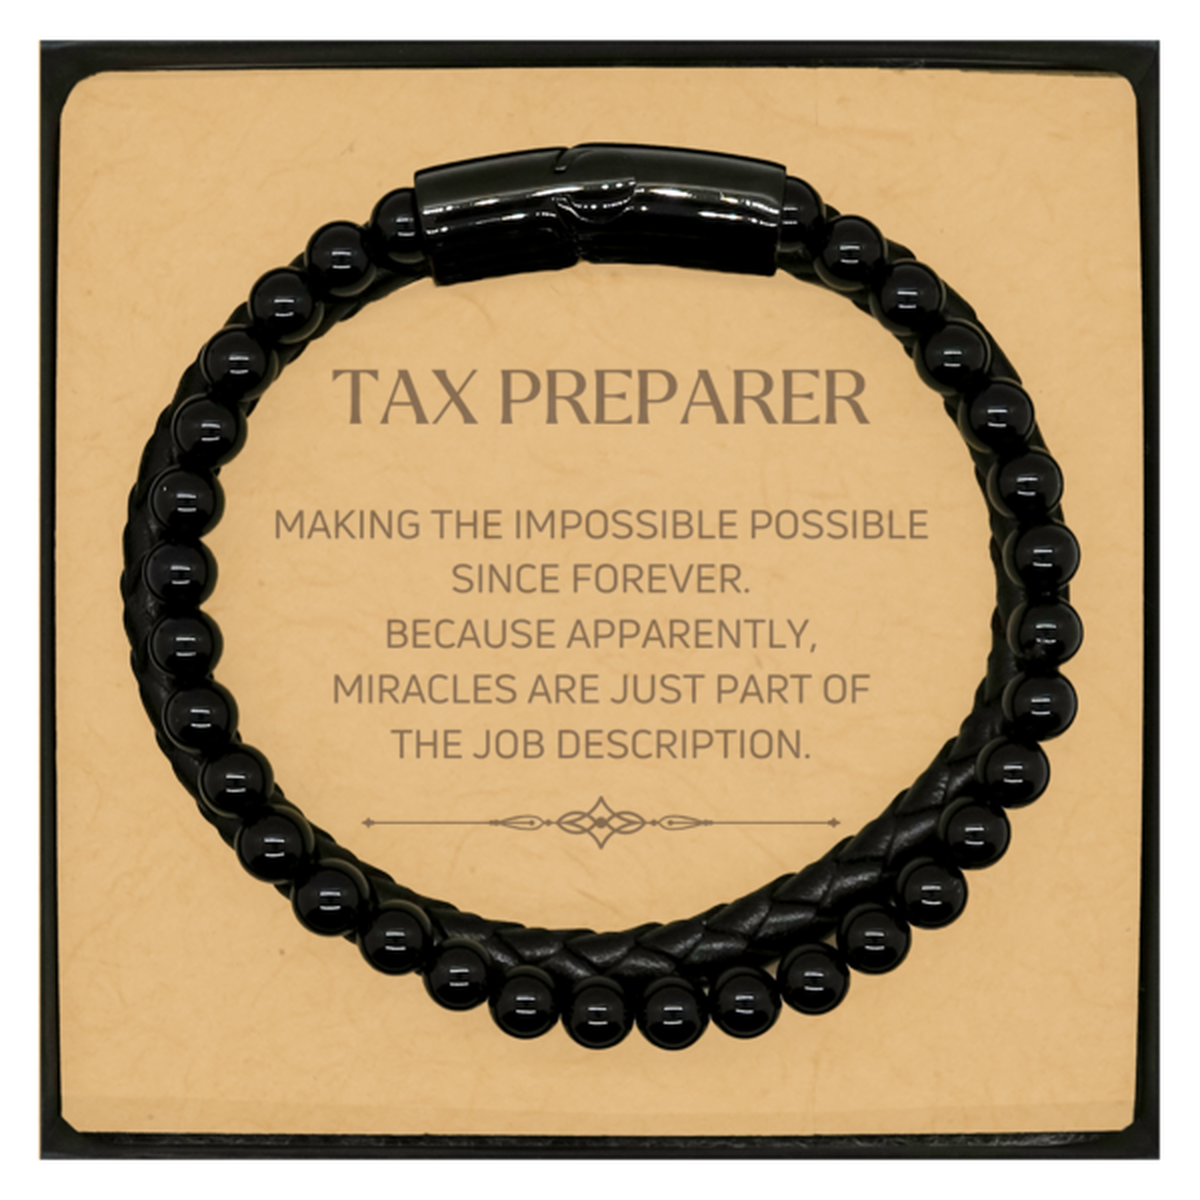 Funny Tax Preparer Gifts, Miracles are just part of the job description, Inspirational Birthday Christmas Stone Leather Bracelets For Tax Preparer, Men, Women, Coworkers, Friends, Boss